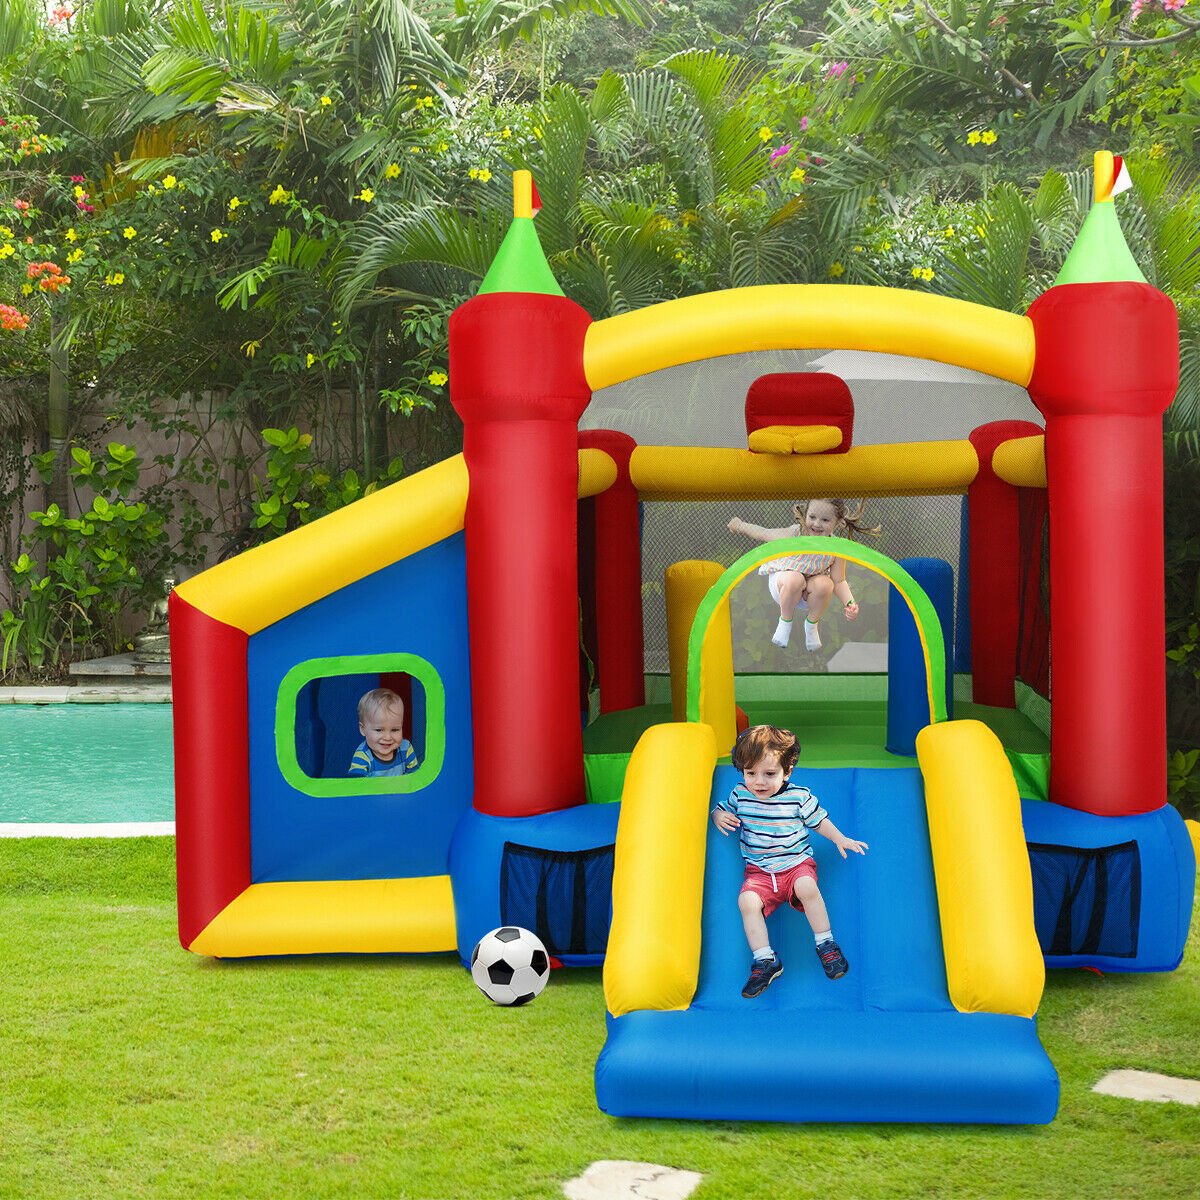 Children's Bounce House - 7-in-1 Inflatable Play with Ocean Balls